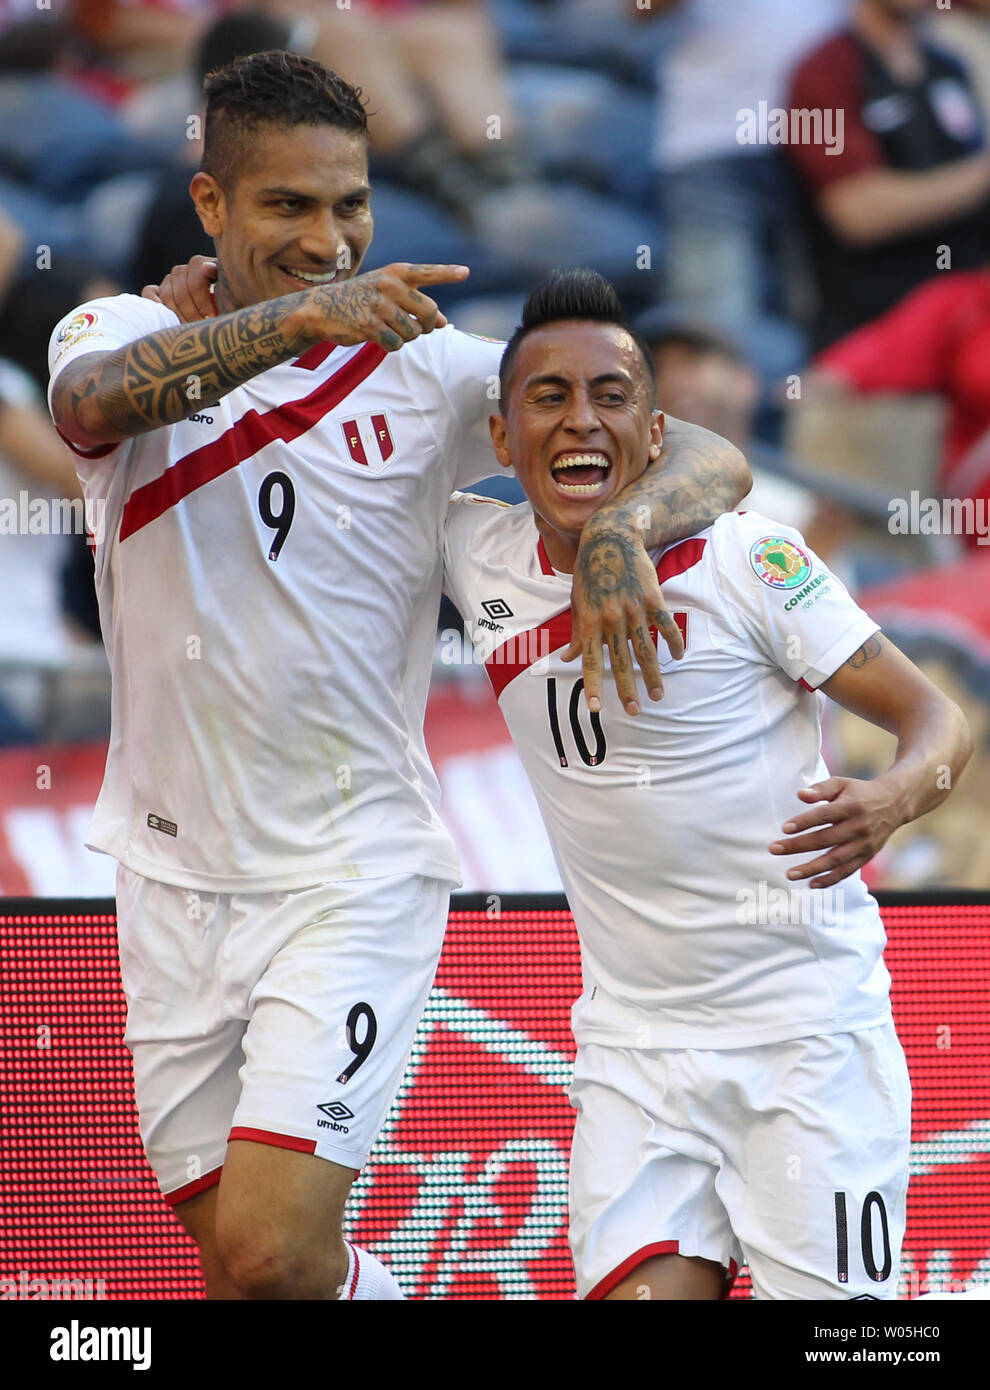 Peru's Paolo Guerrero (9) celebrates with teammate Christian Cueva (10) after scoring a goal during the second half against Haiti in a 2016 Copa America Centenario soccer match at CenturyLink Field in Seattle, Washington on June 4, 2016.  Peru beat Haiti- 1-0. Photo by Jim Bryant/ UPI Stock Photo